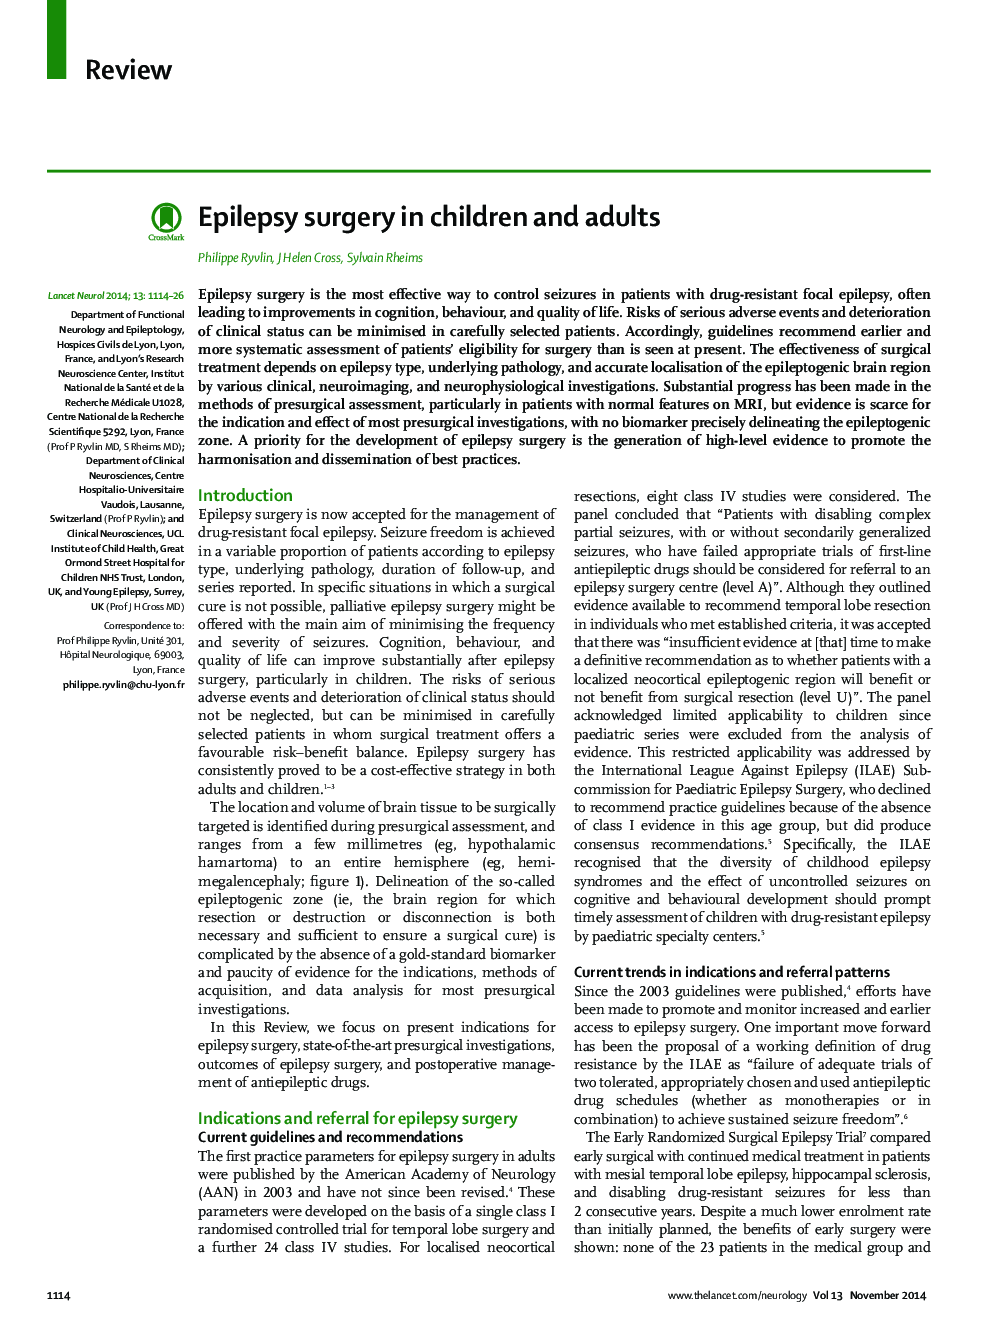 Epilepsy surgery in children and adults